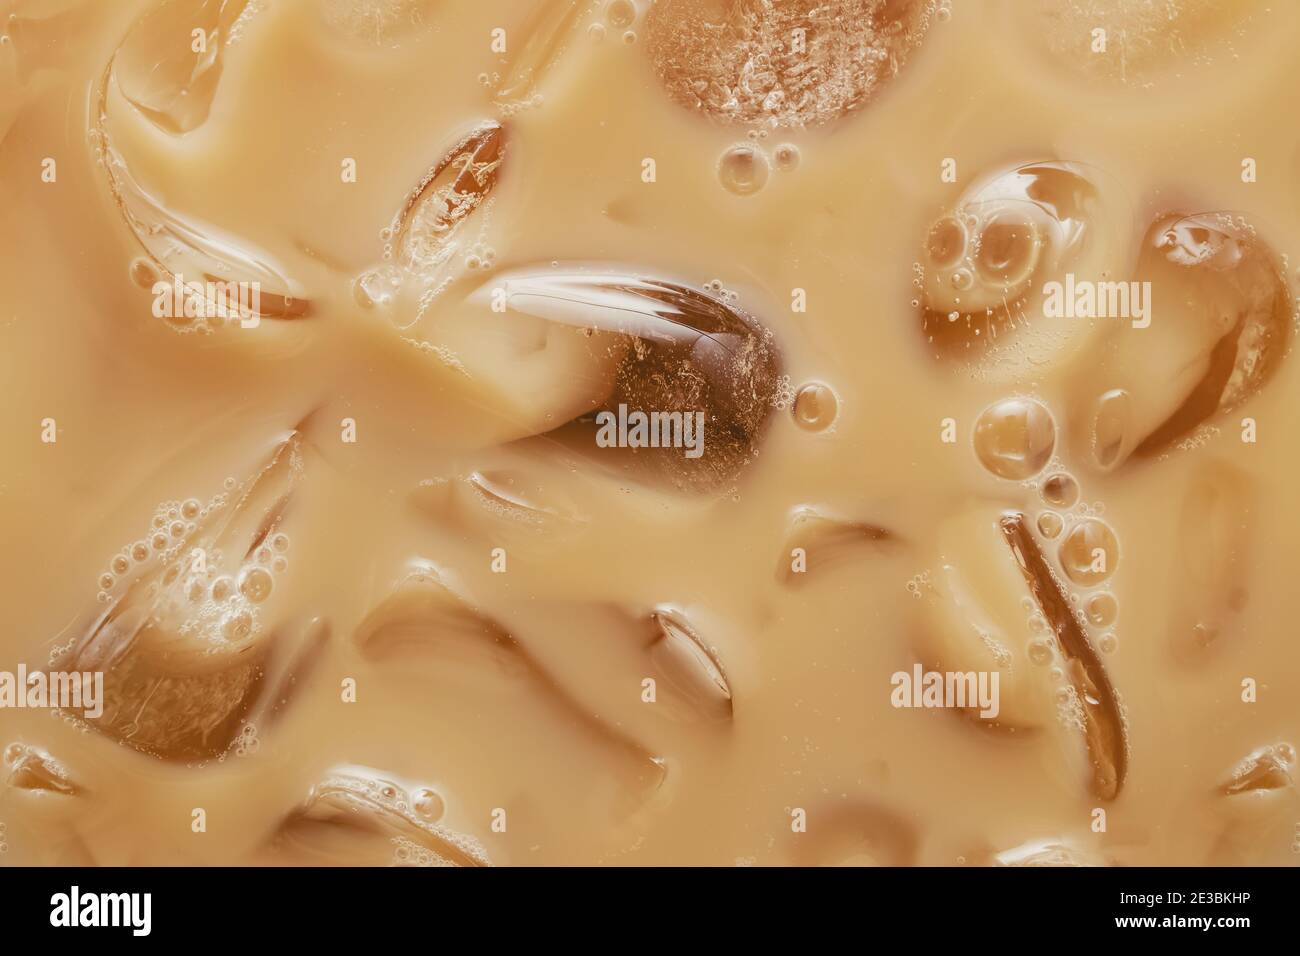 Close-up of Cold latte drink with ice cubes, Stock Photo